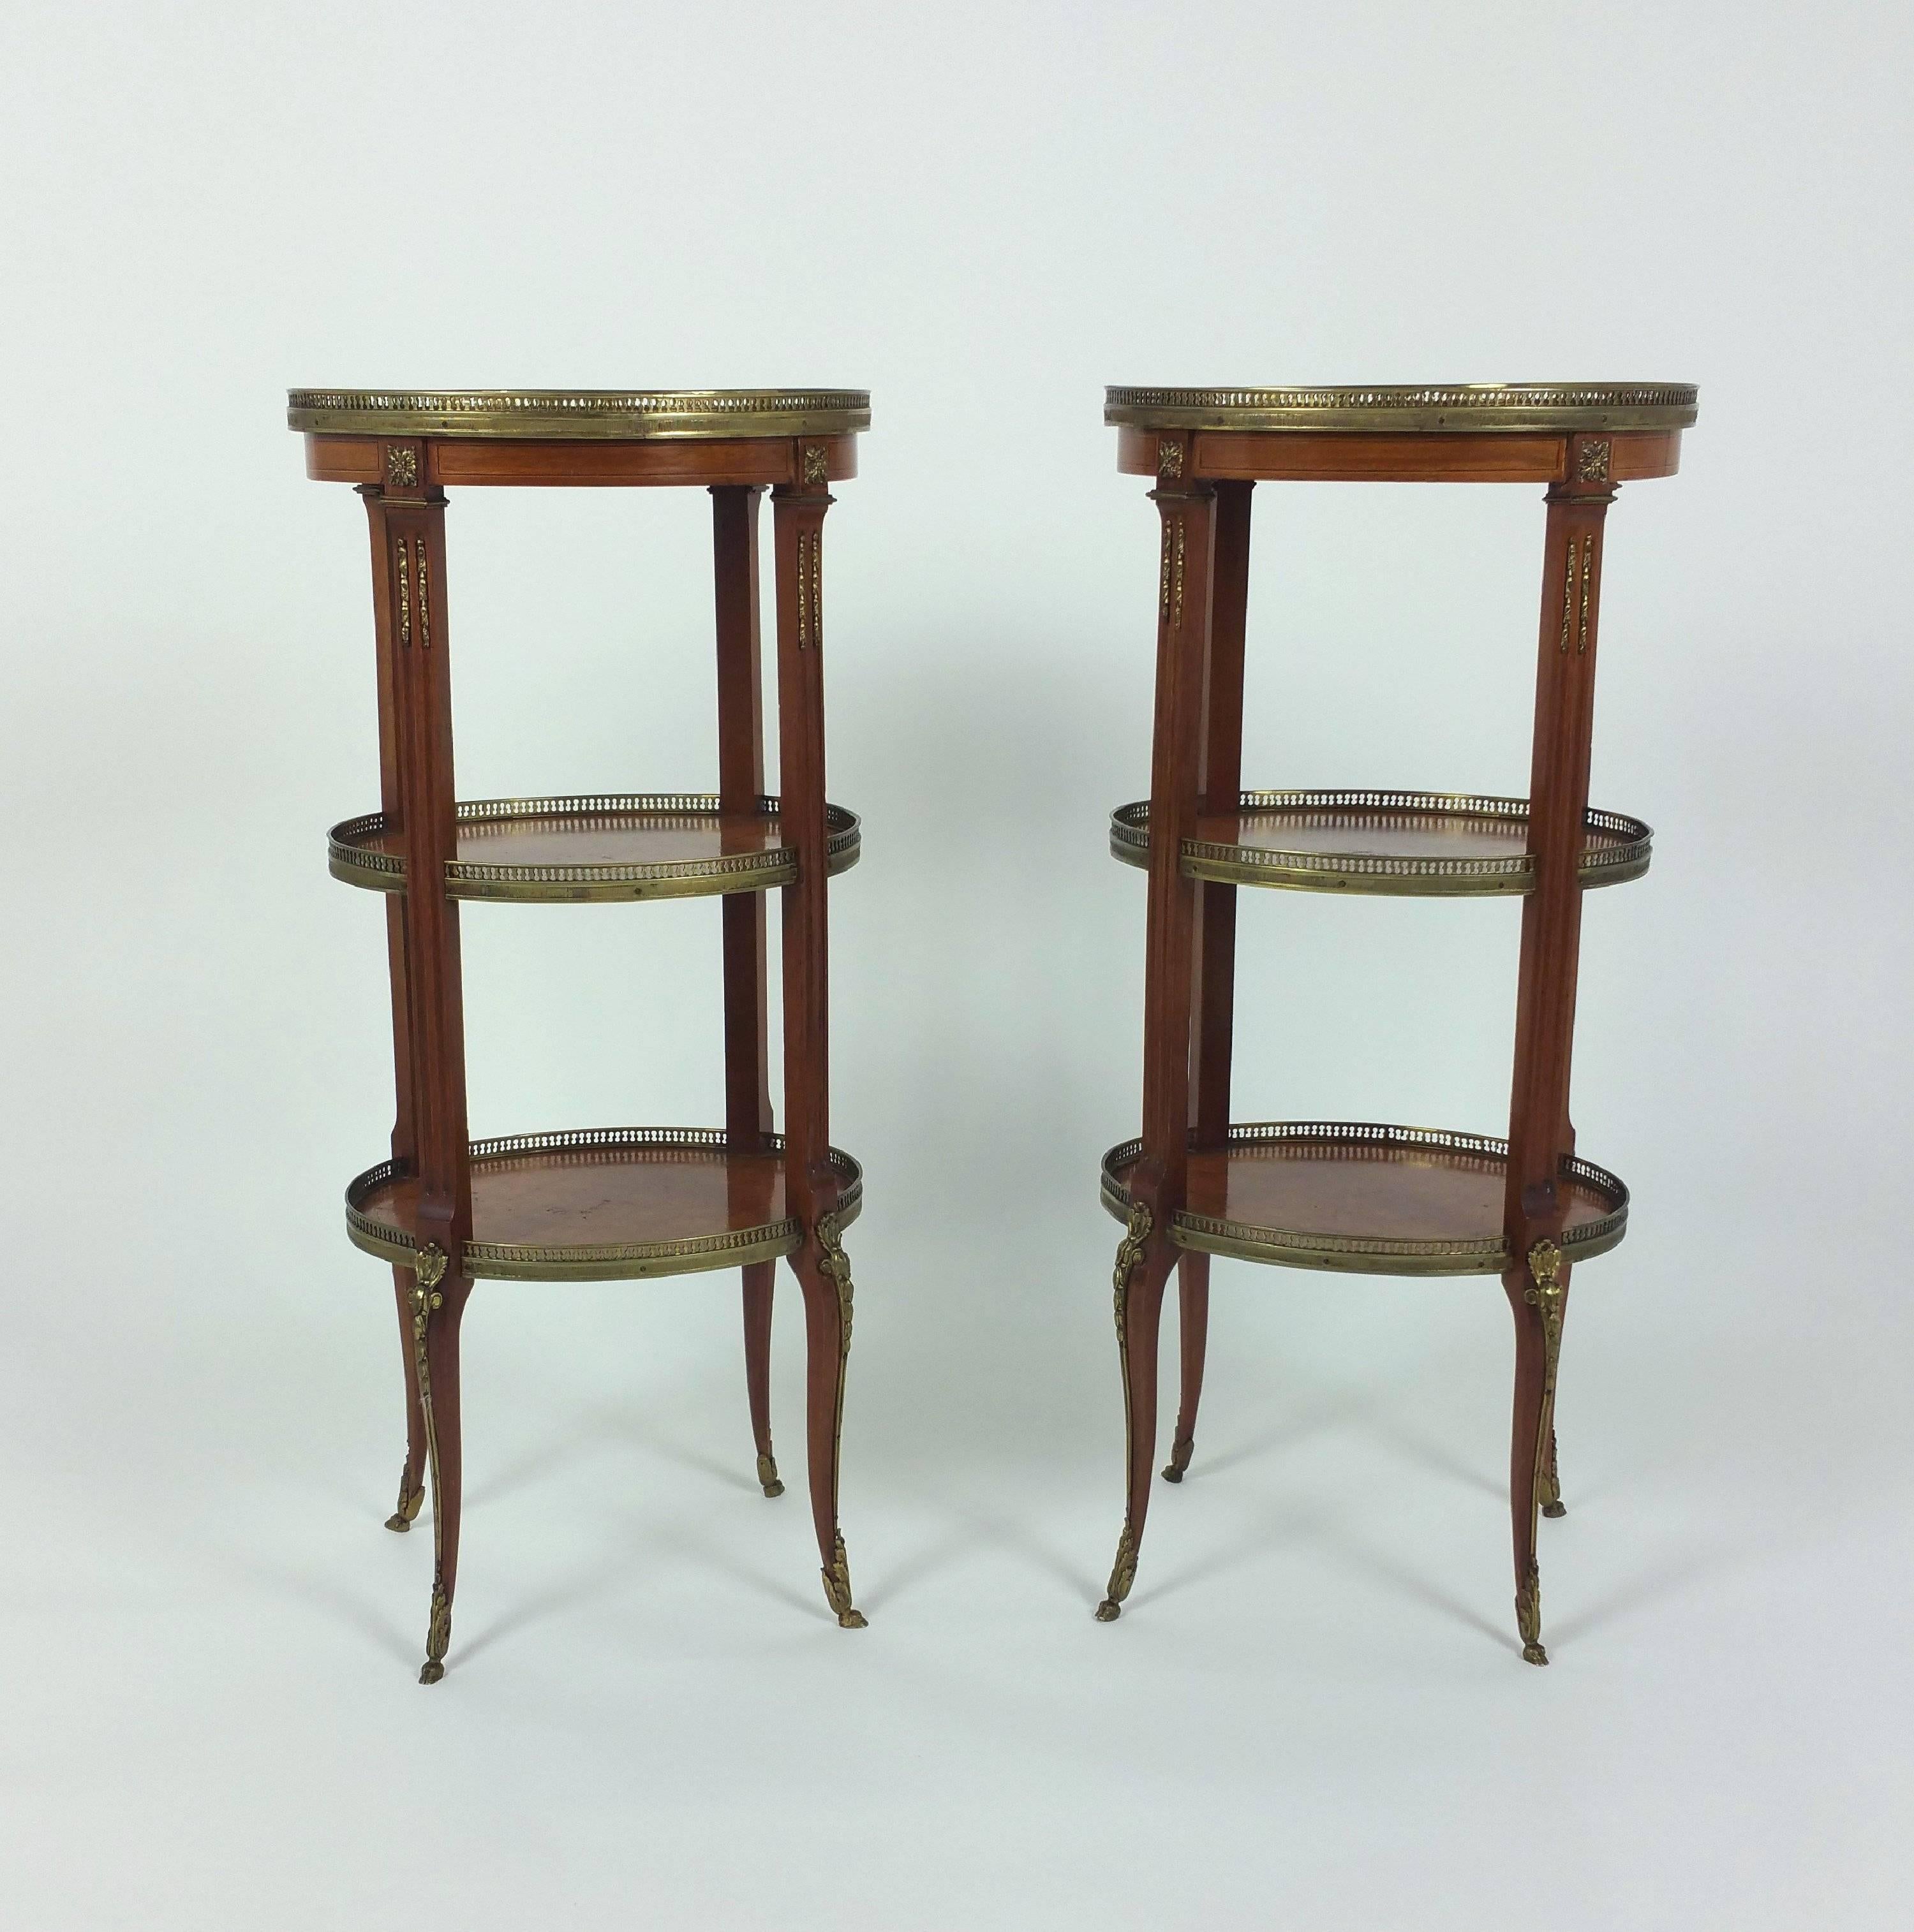 This beautiful pair of French marquetry inlaid kingwood étagères feature three tiers, each with a gilt brass gallery and gilt brass mounts on the top and bottom. The étagères are supported on slender shaped cabriole legs and finish with delicate